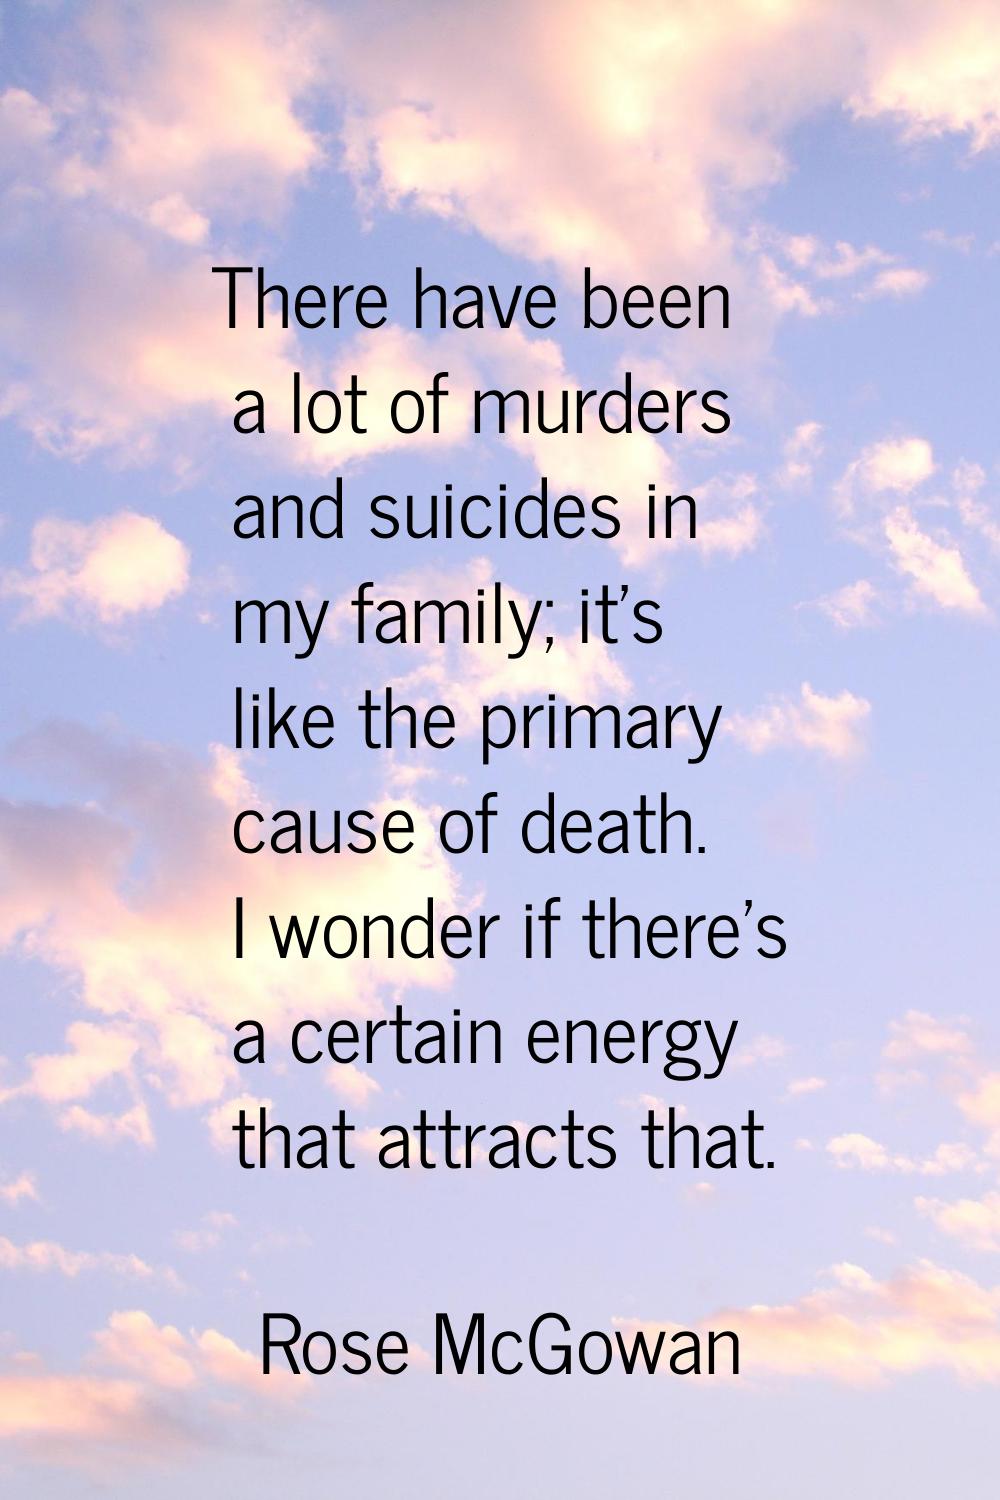 There have been a lot of murders and suicides in my family; it's like the primary cause of death. I